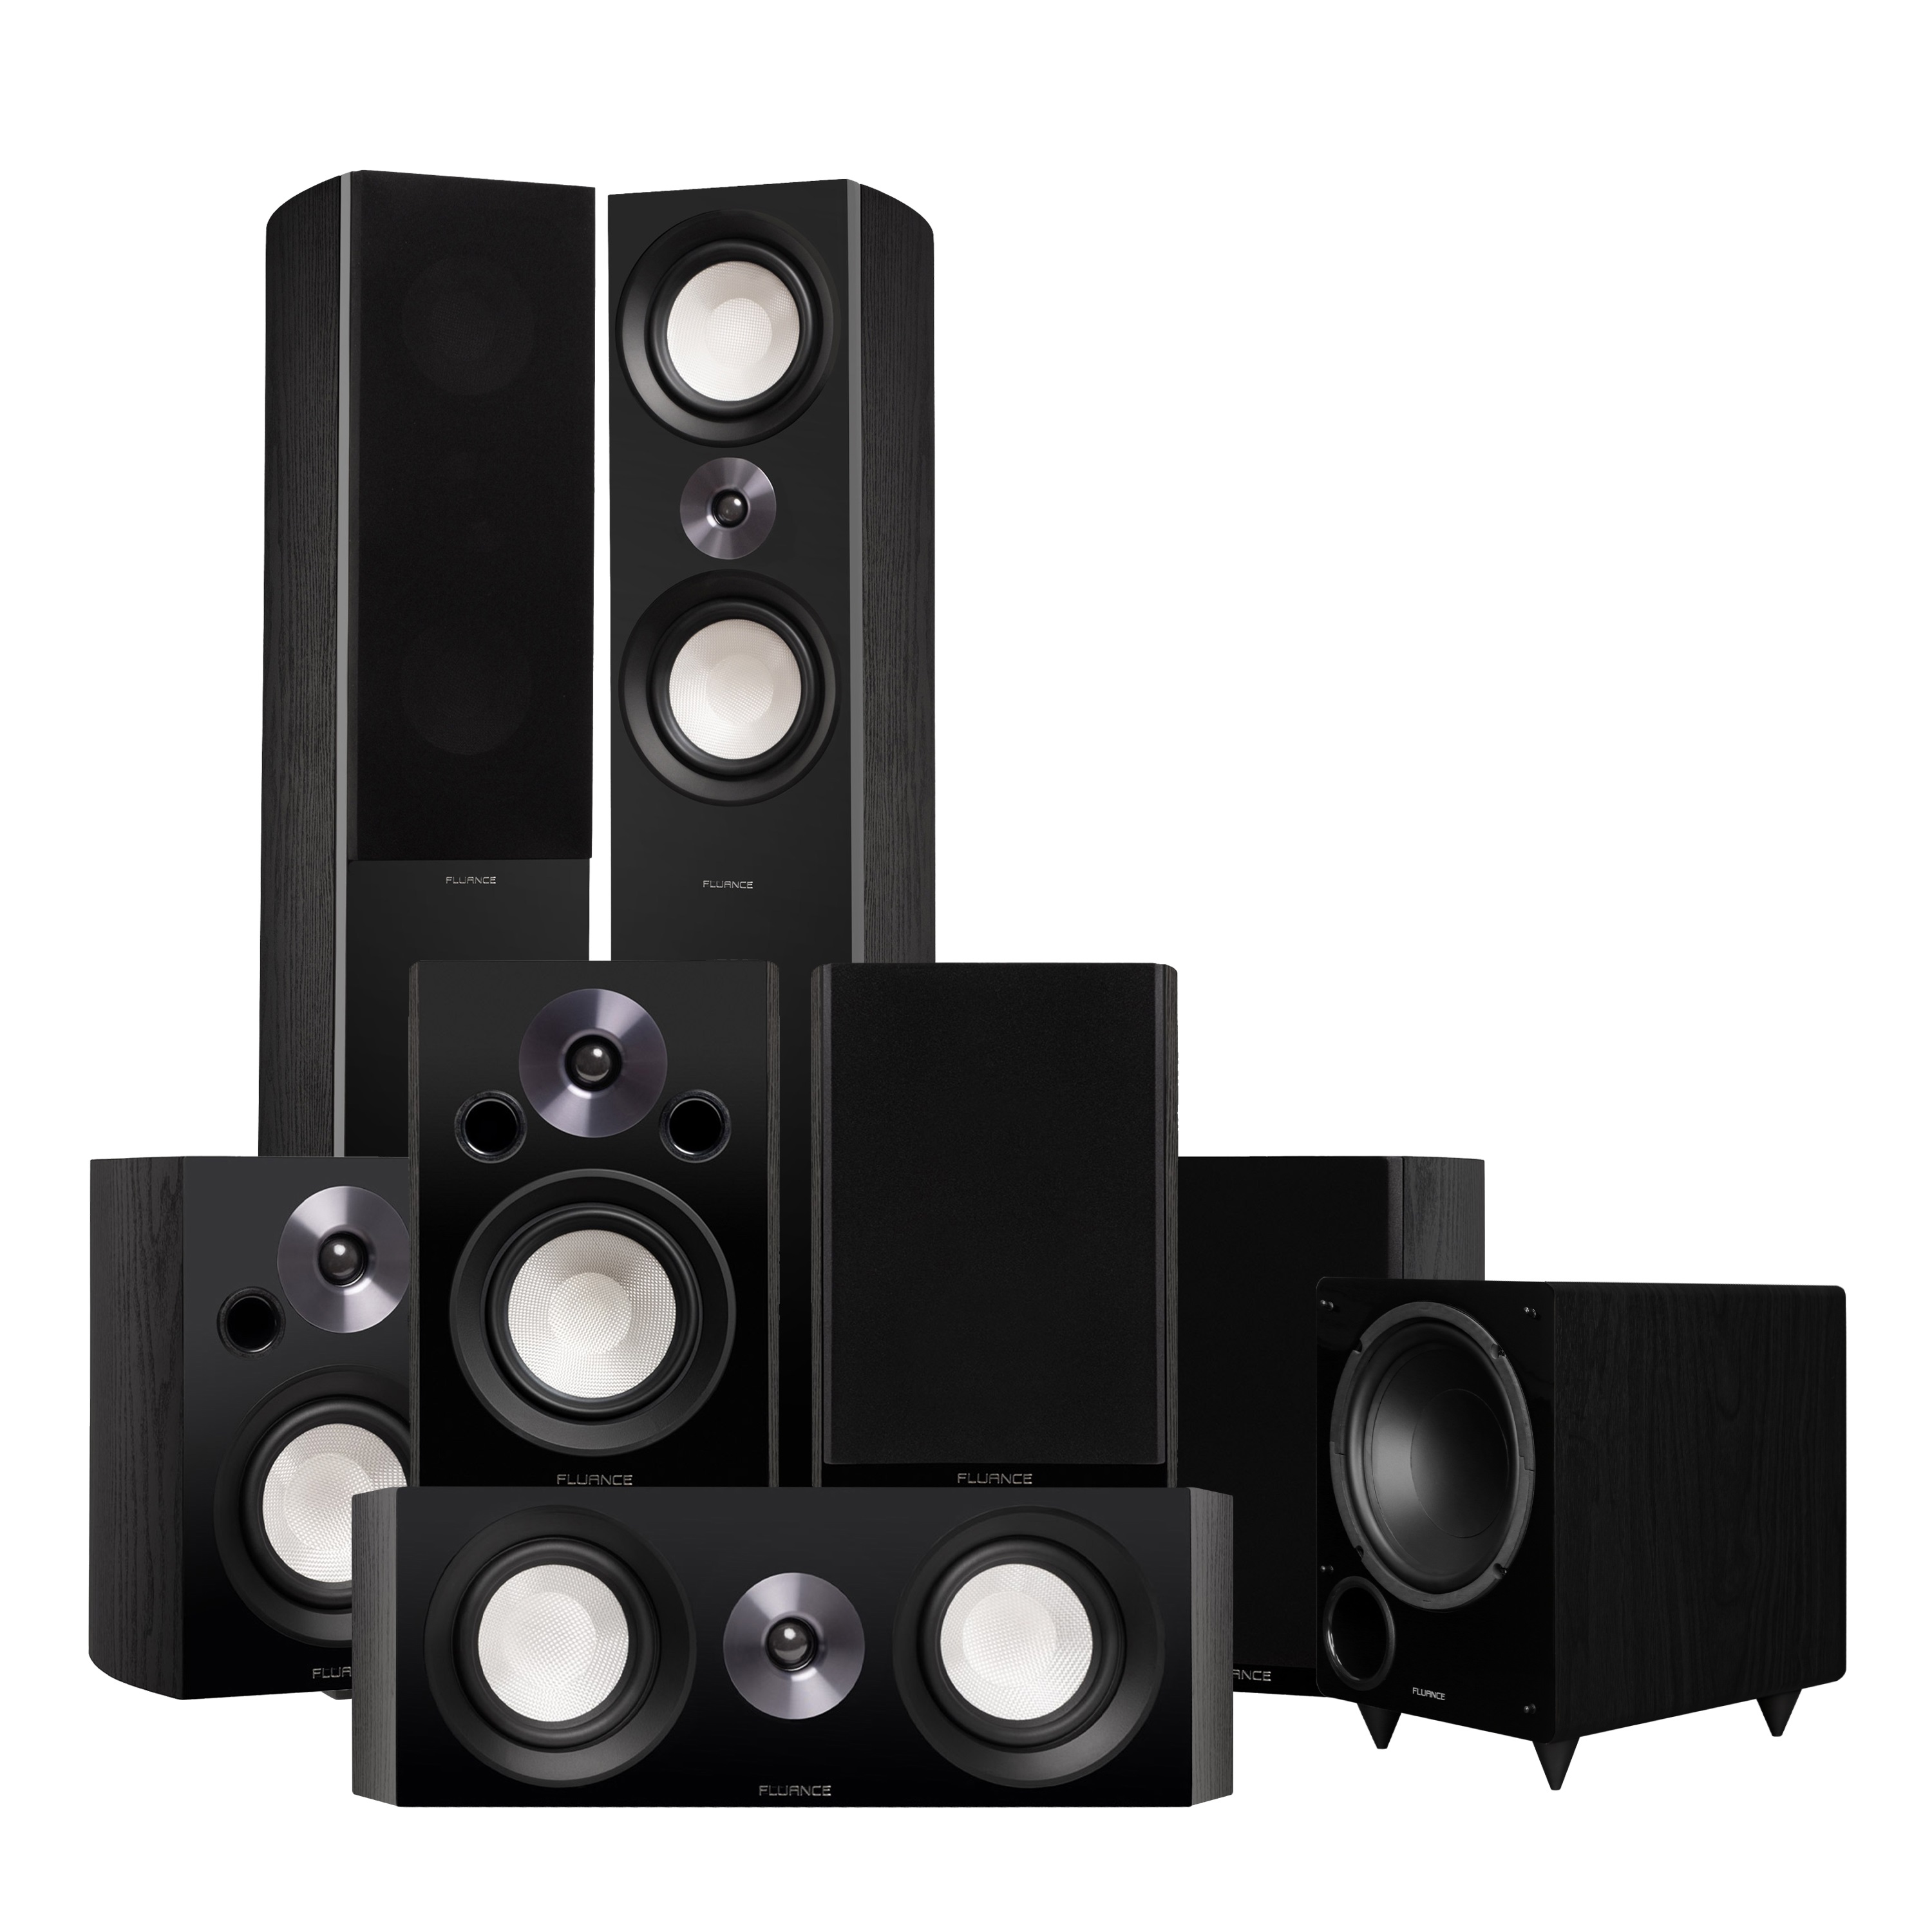 Fluance Reference Surround Sound Home Theater 7.1 Channel Speaker - Black Ash (X871BR)